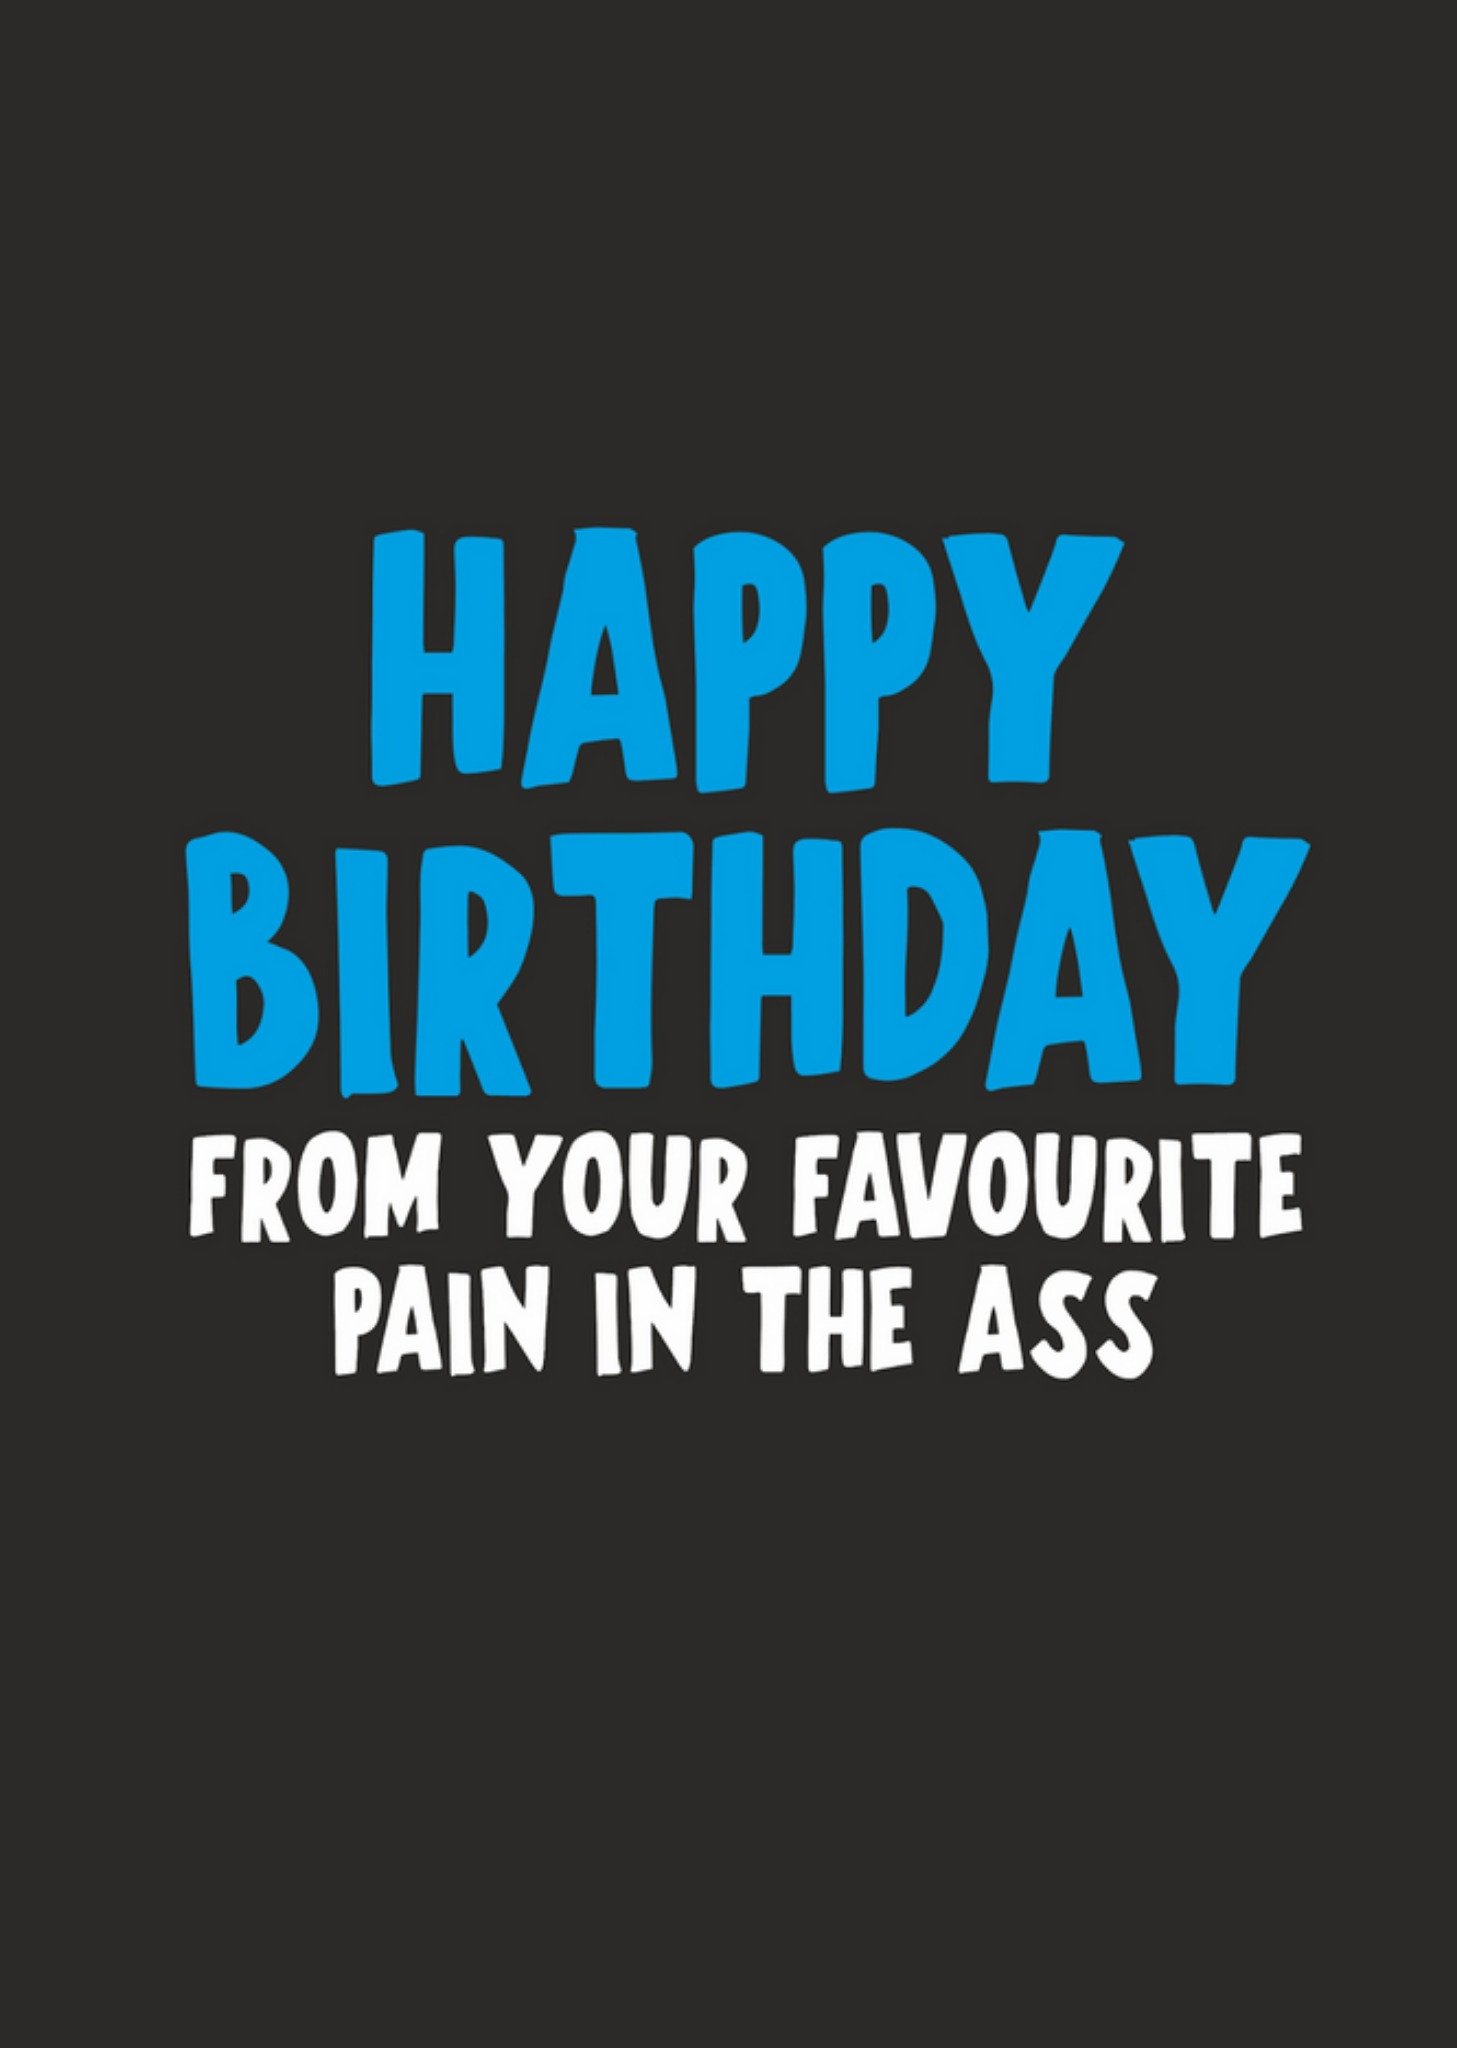 Banter King From Your Favourite Pain In The Ass Birthday Card Ecard